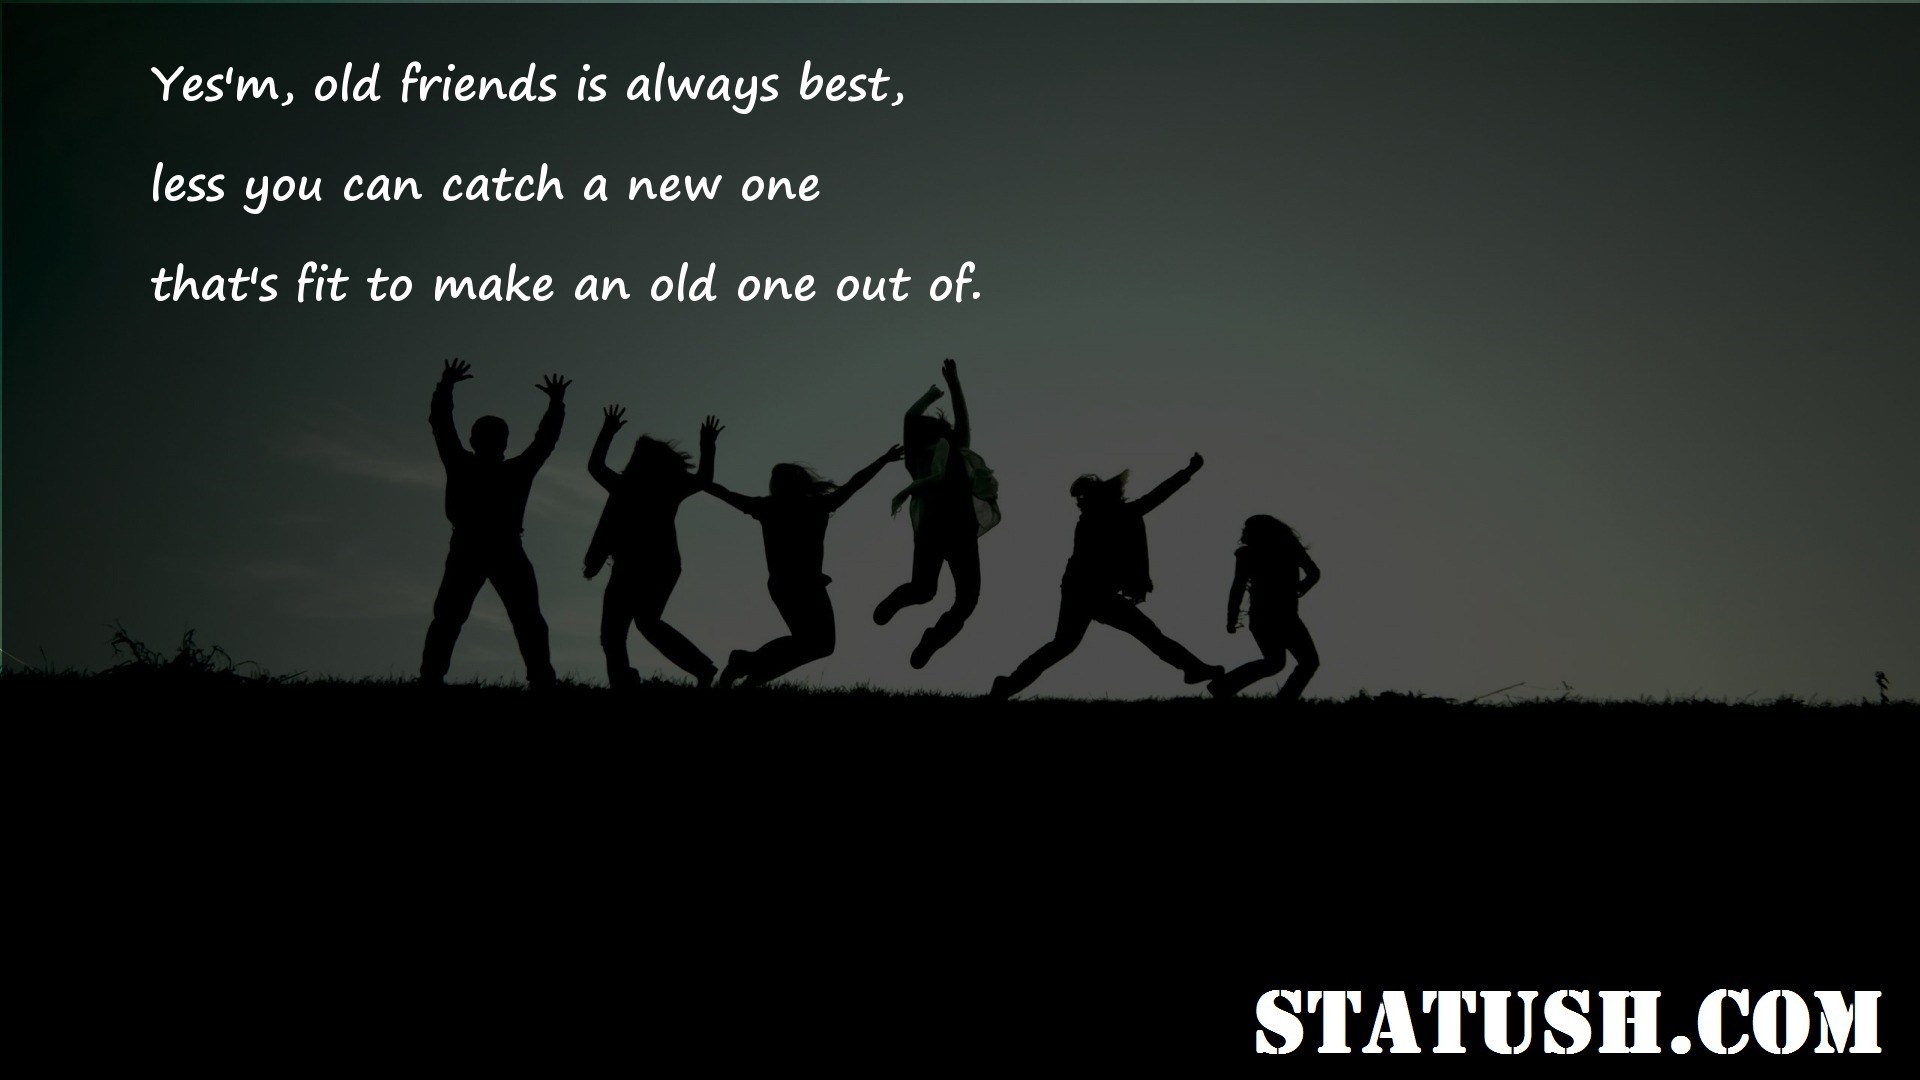 Yes im old friends is always best Friendship Quotes at statush.com